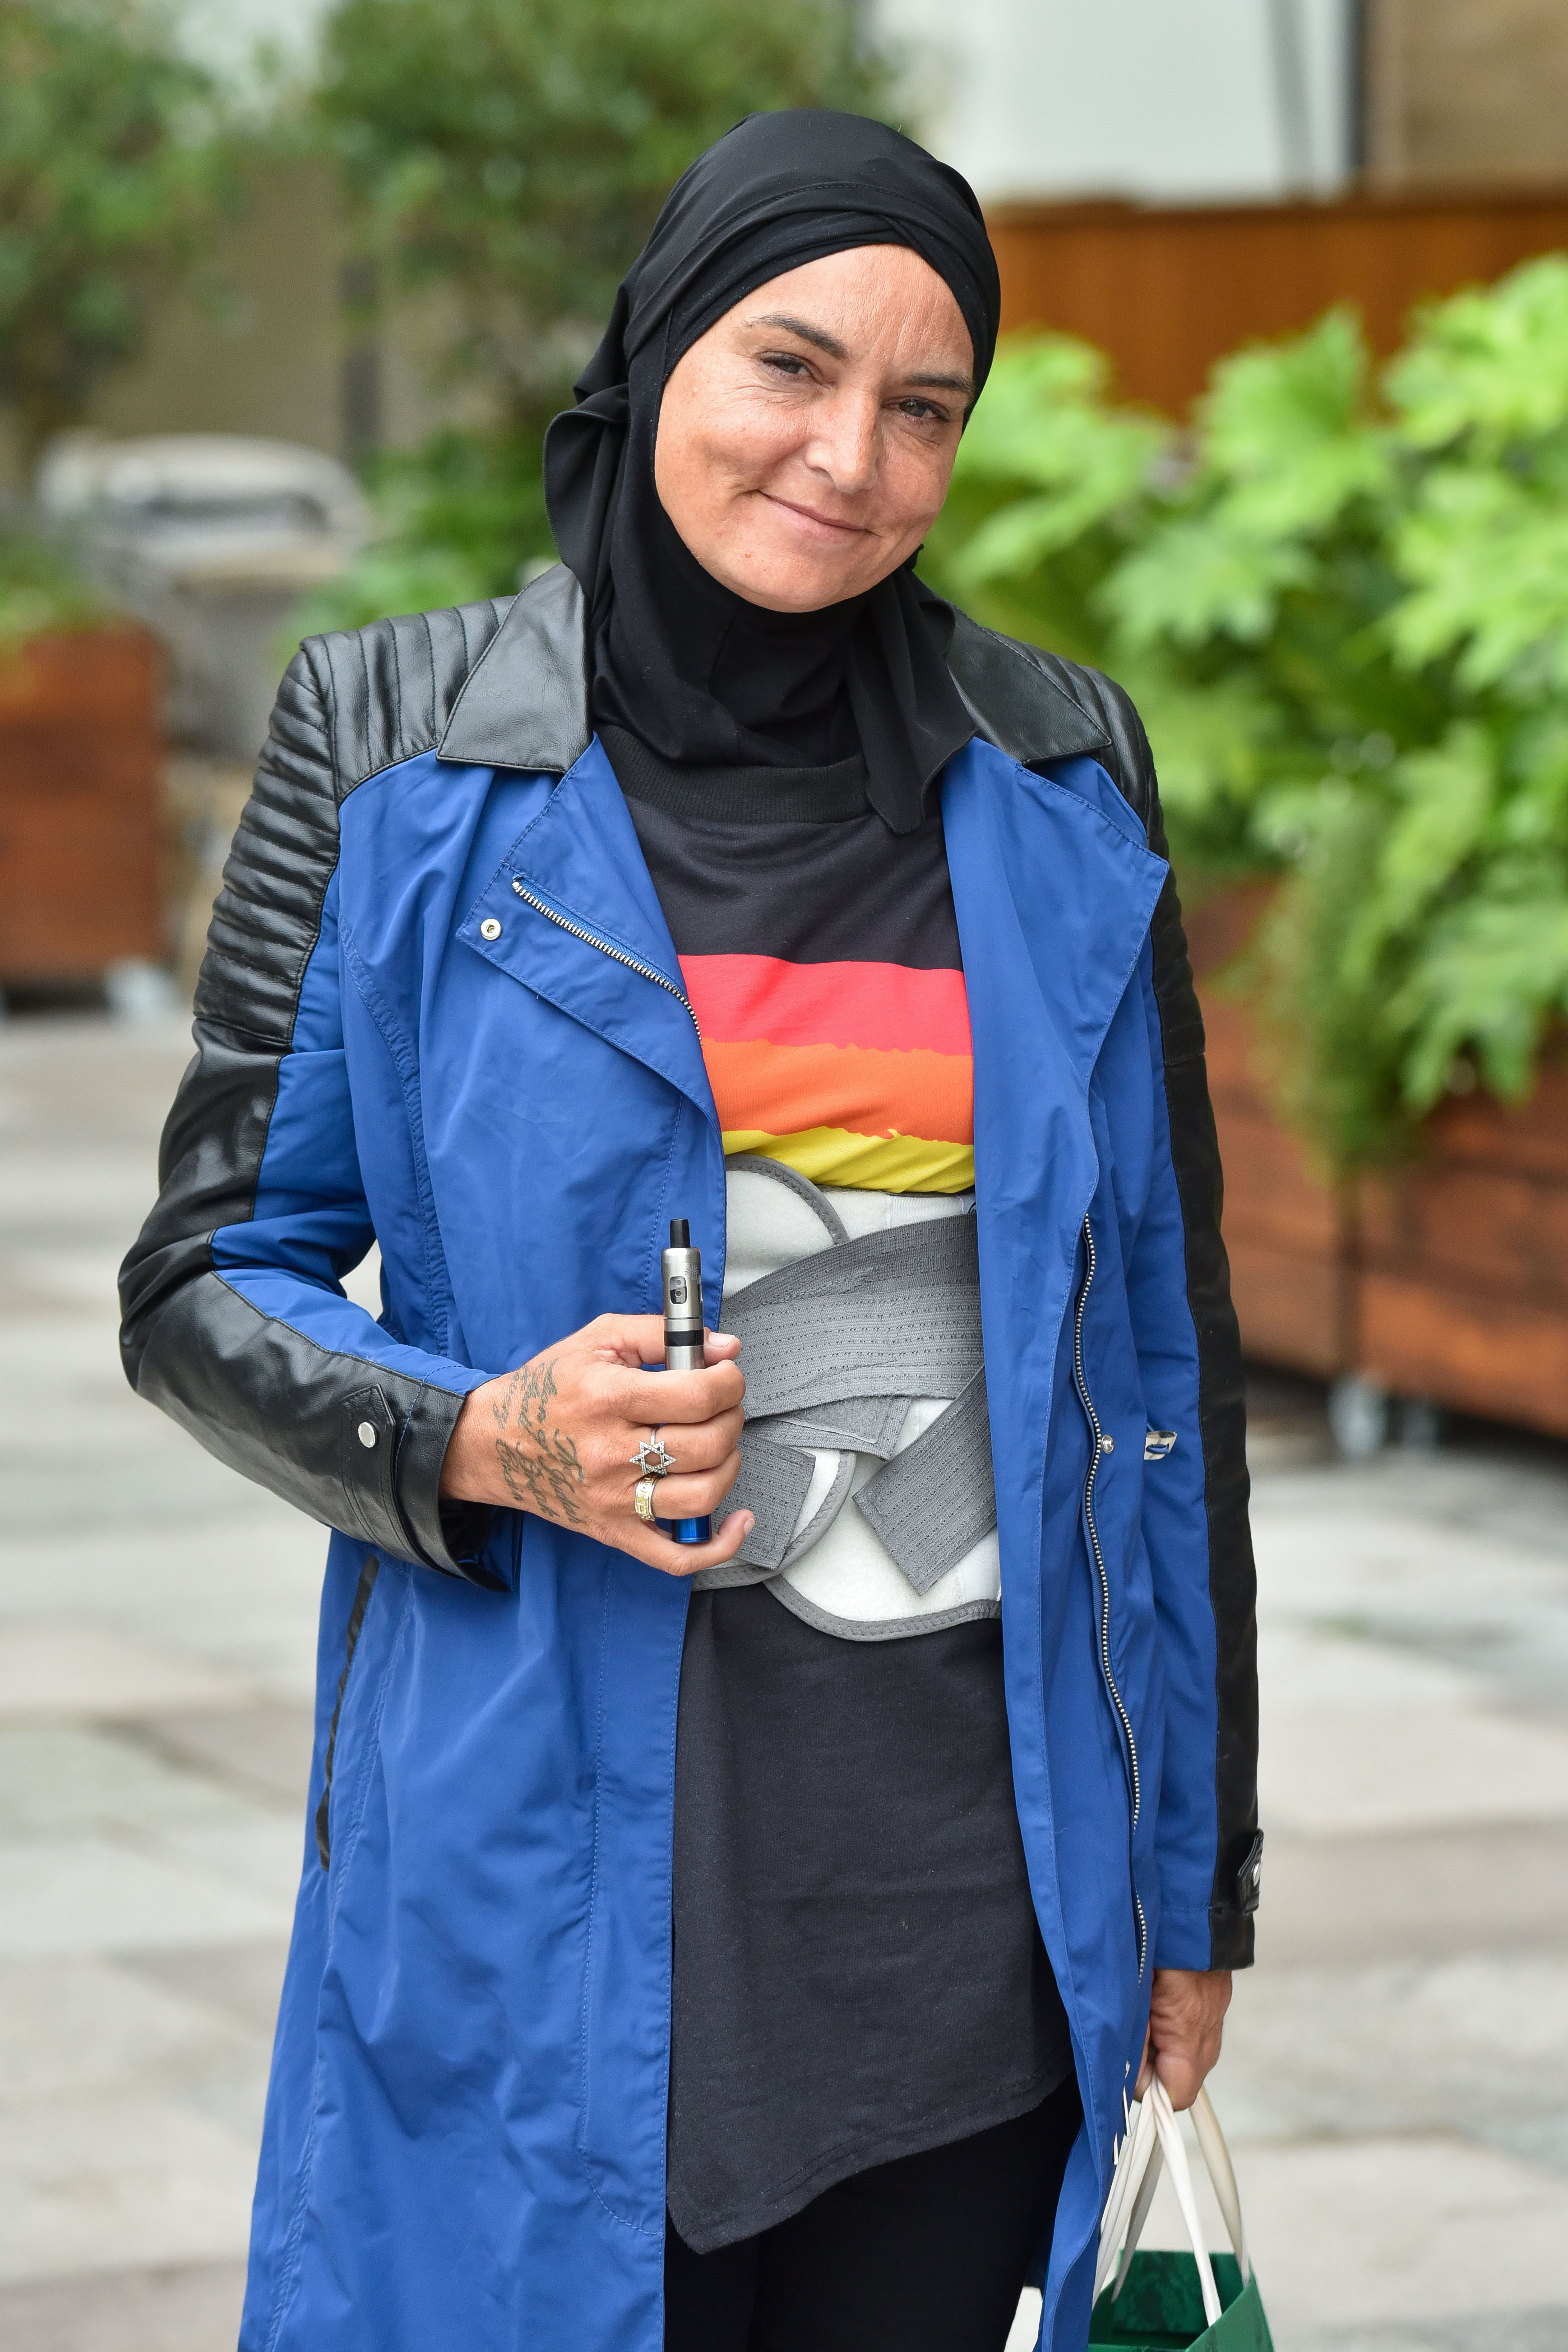 Sinéad O'Connor in London, England on September 16, 2019 | Source: Getty Images